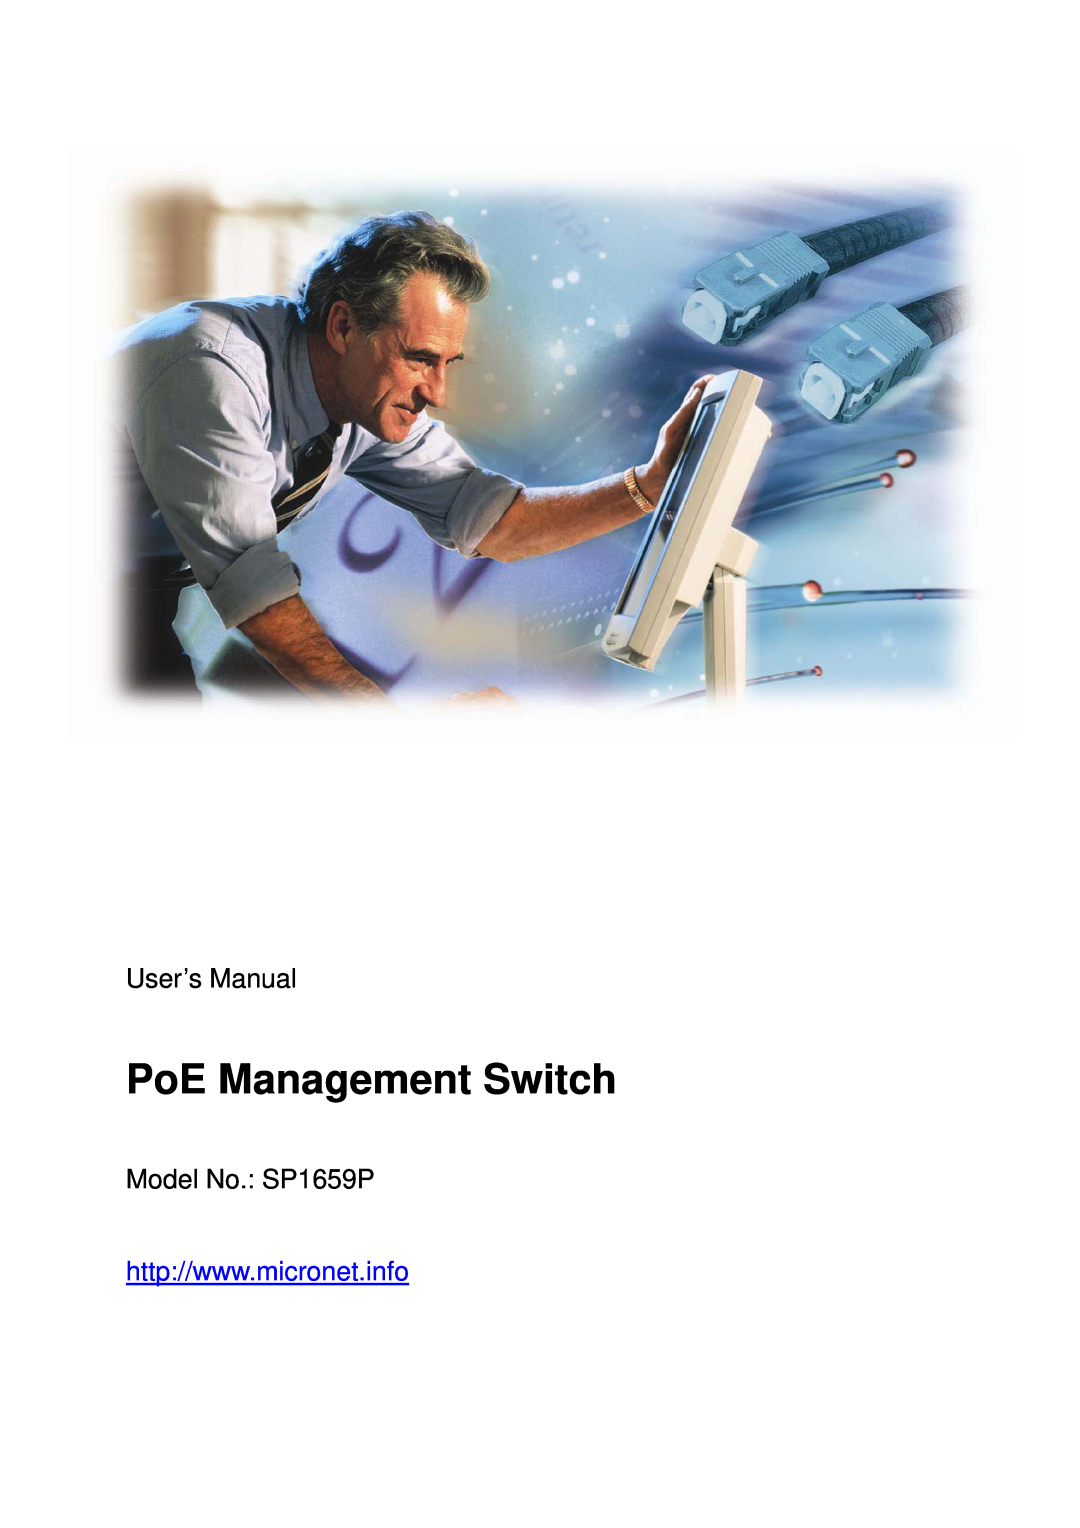 MicroNet Technology user manual PoE Management Switch, User’s Manual, Model No. SP1659P 